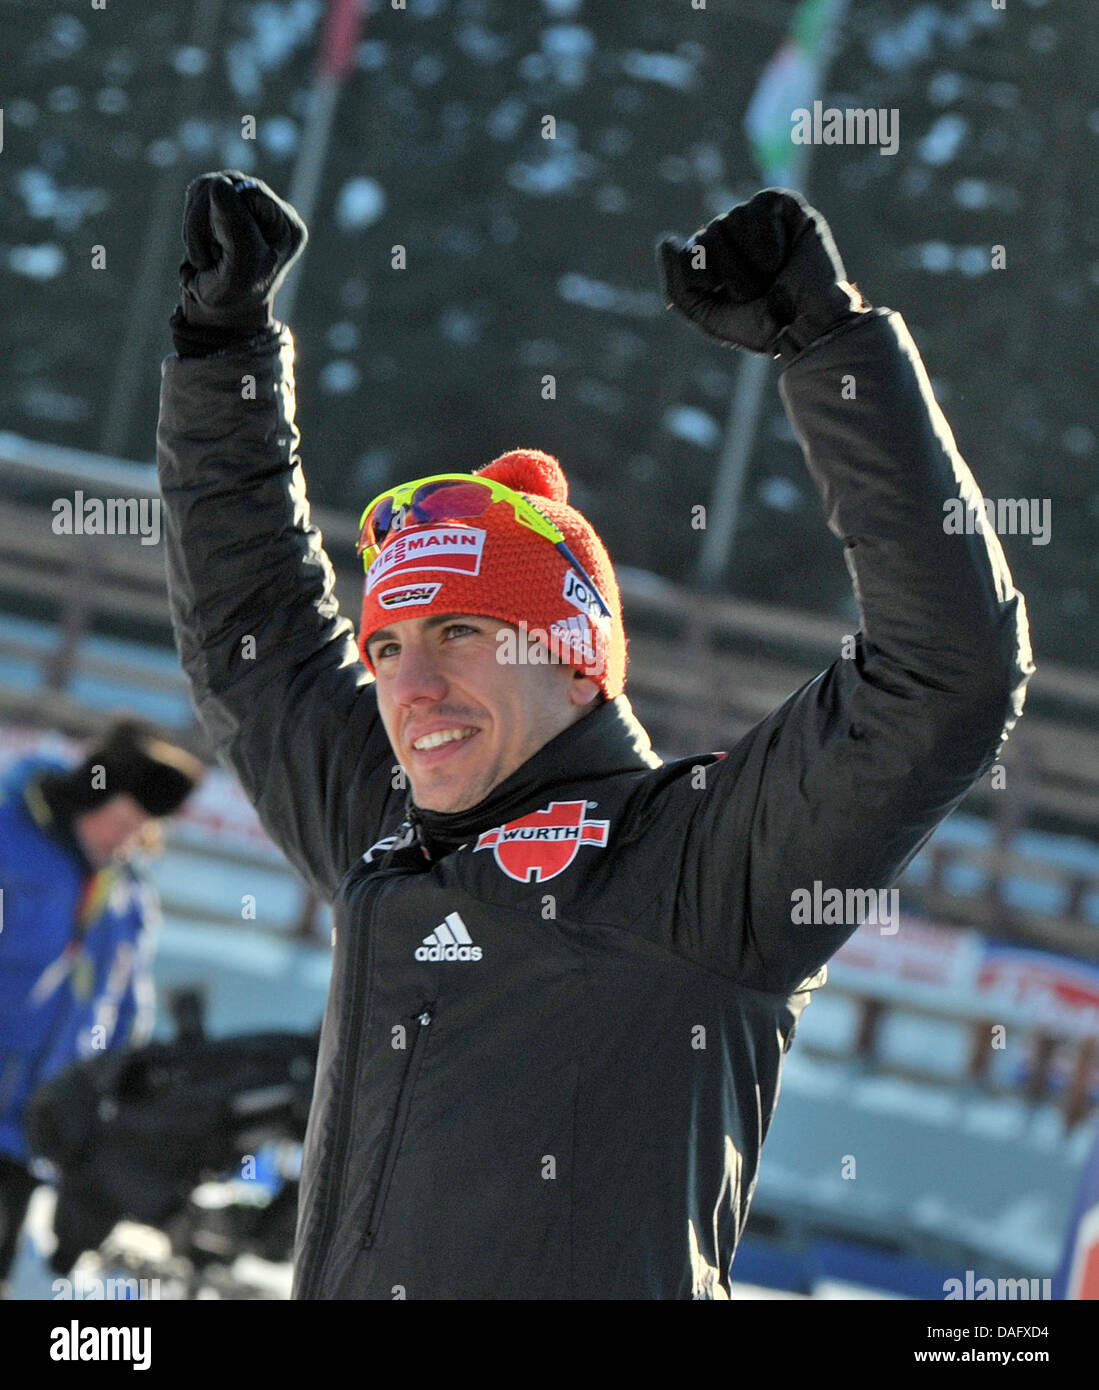 Biathlon Weltmeisterschaft High Resolution Stock Photography and Images -  Alamy